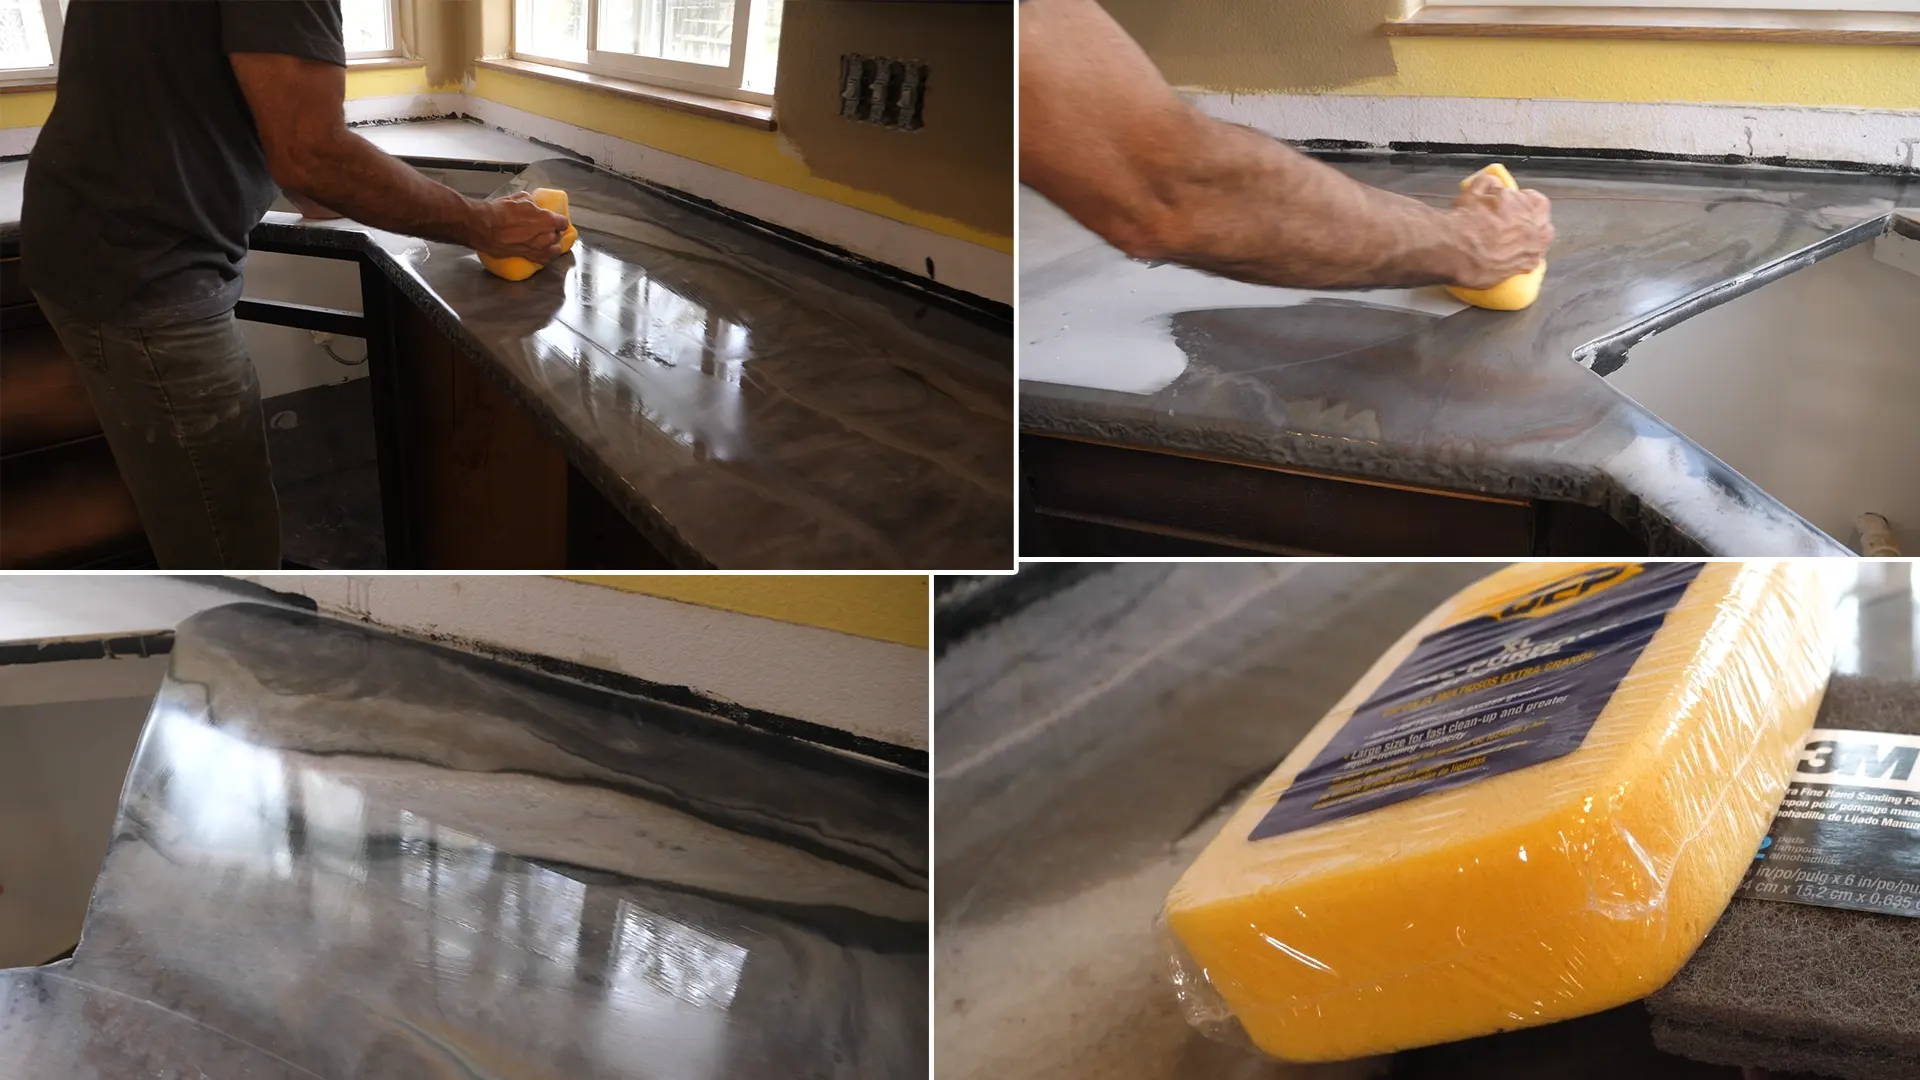 Wiping away dust with a sponge and water, allowing it to dry for a strong bond with the topcoat.